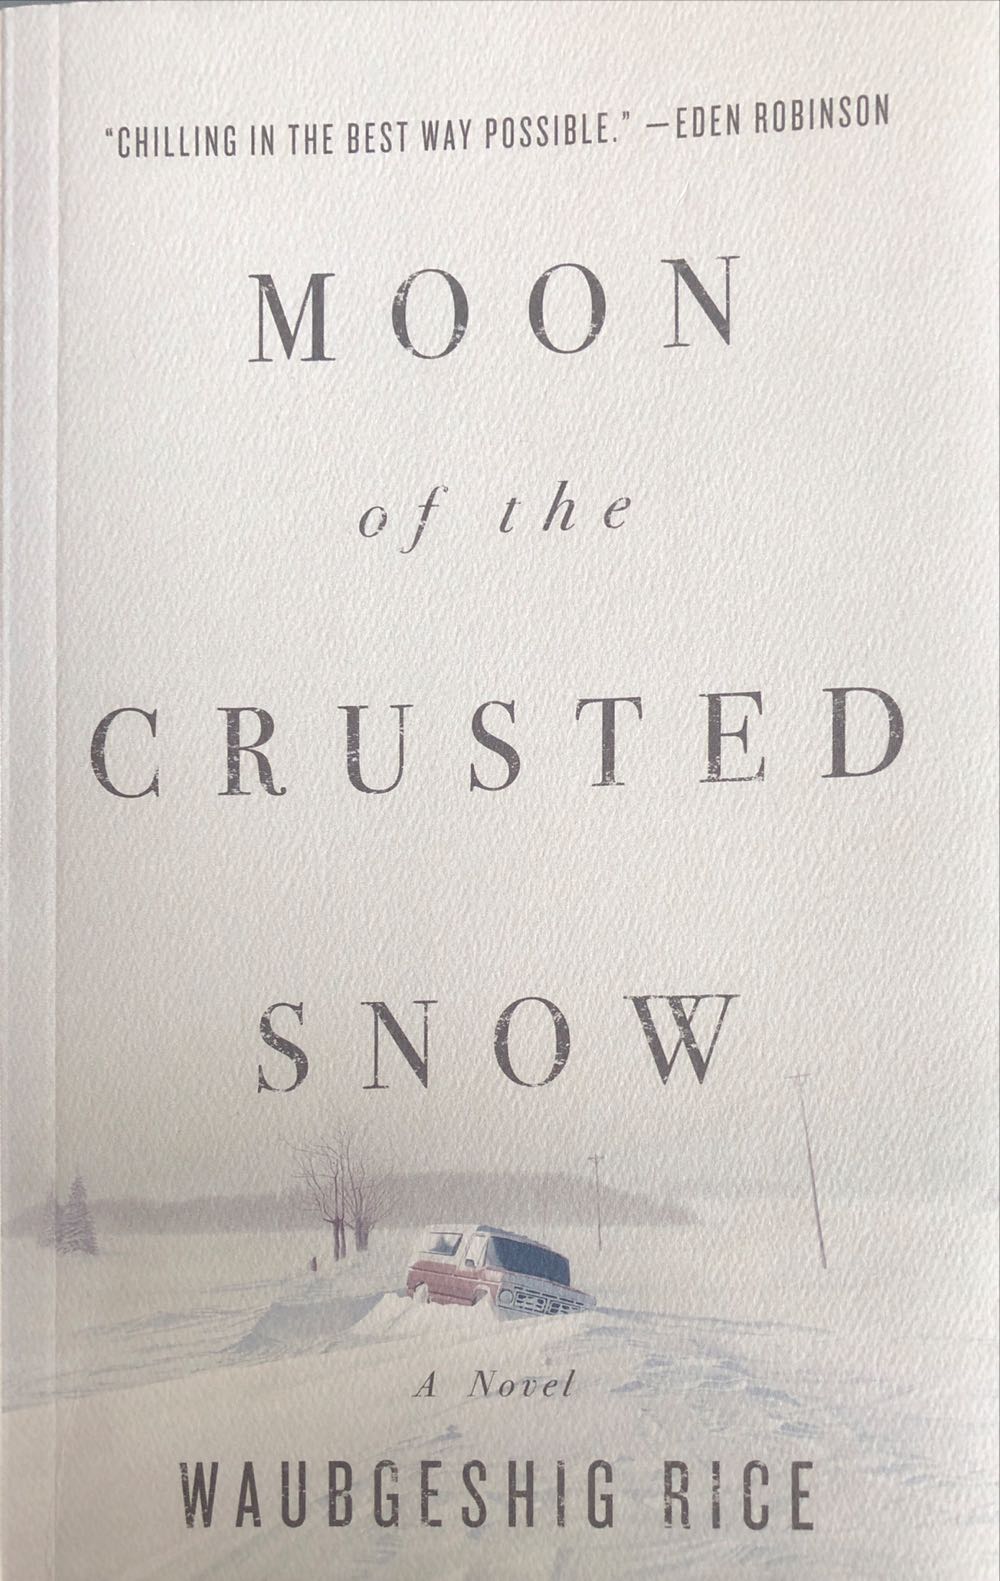 Moon of the Crusted Snow - Waubgeshig Rice (ECW Press) book collectible [Barcode 9781770414006] - Main Image 1